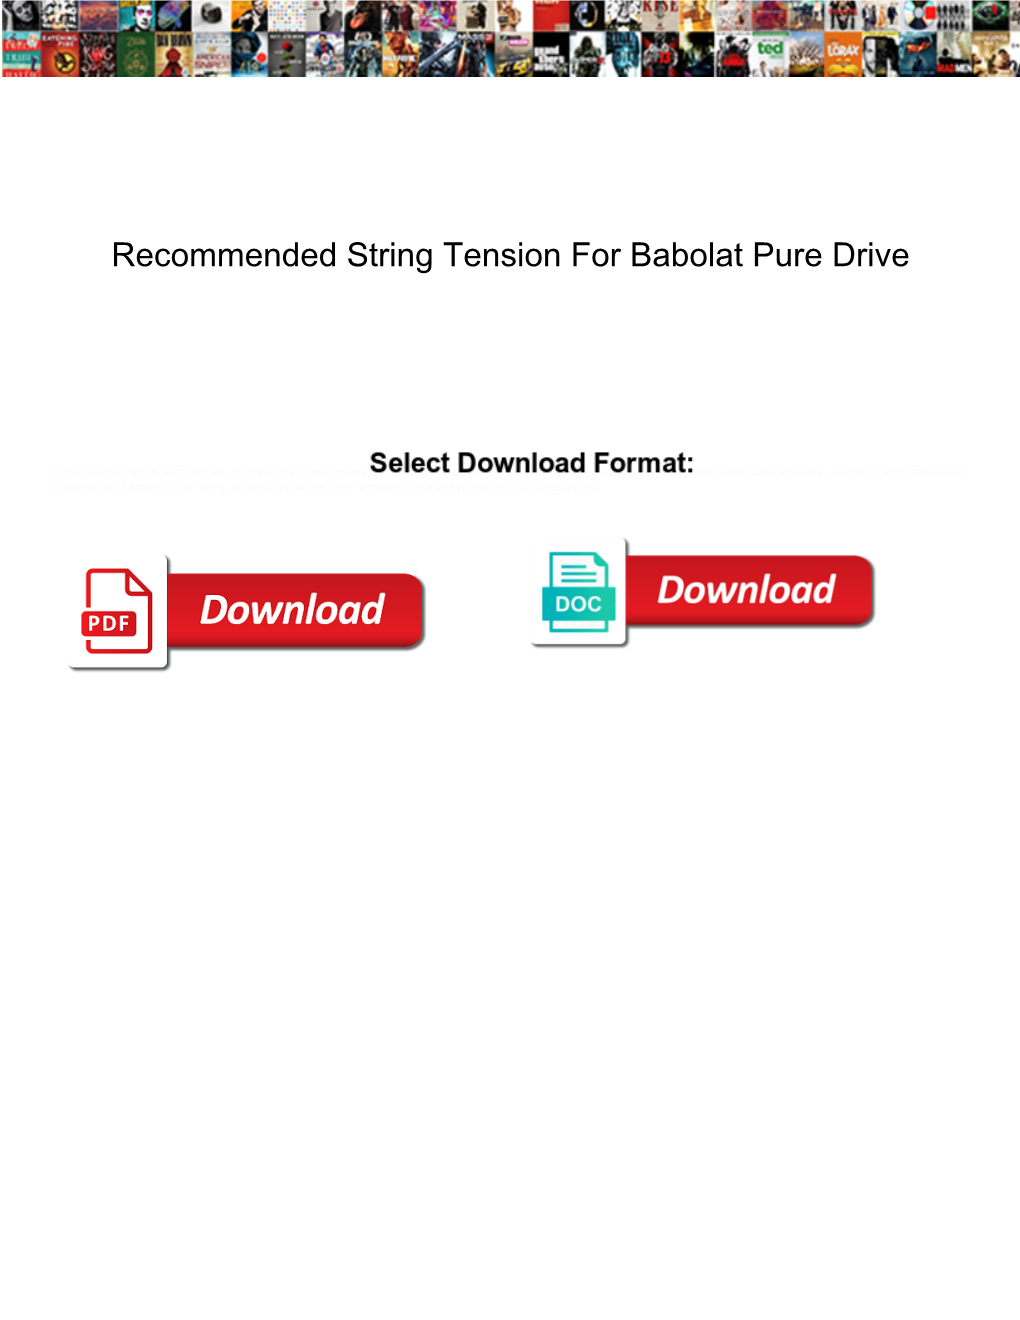 Recommended String Tension for Babolat Pure Drive